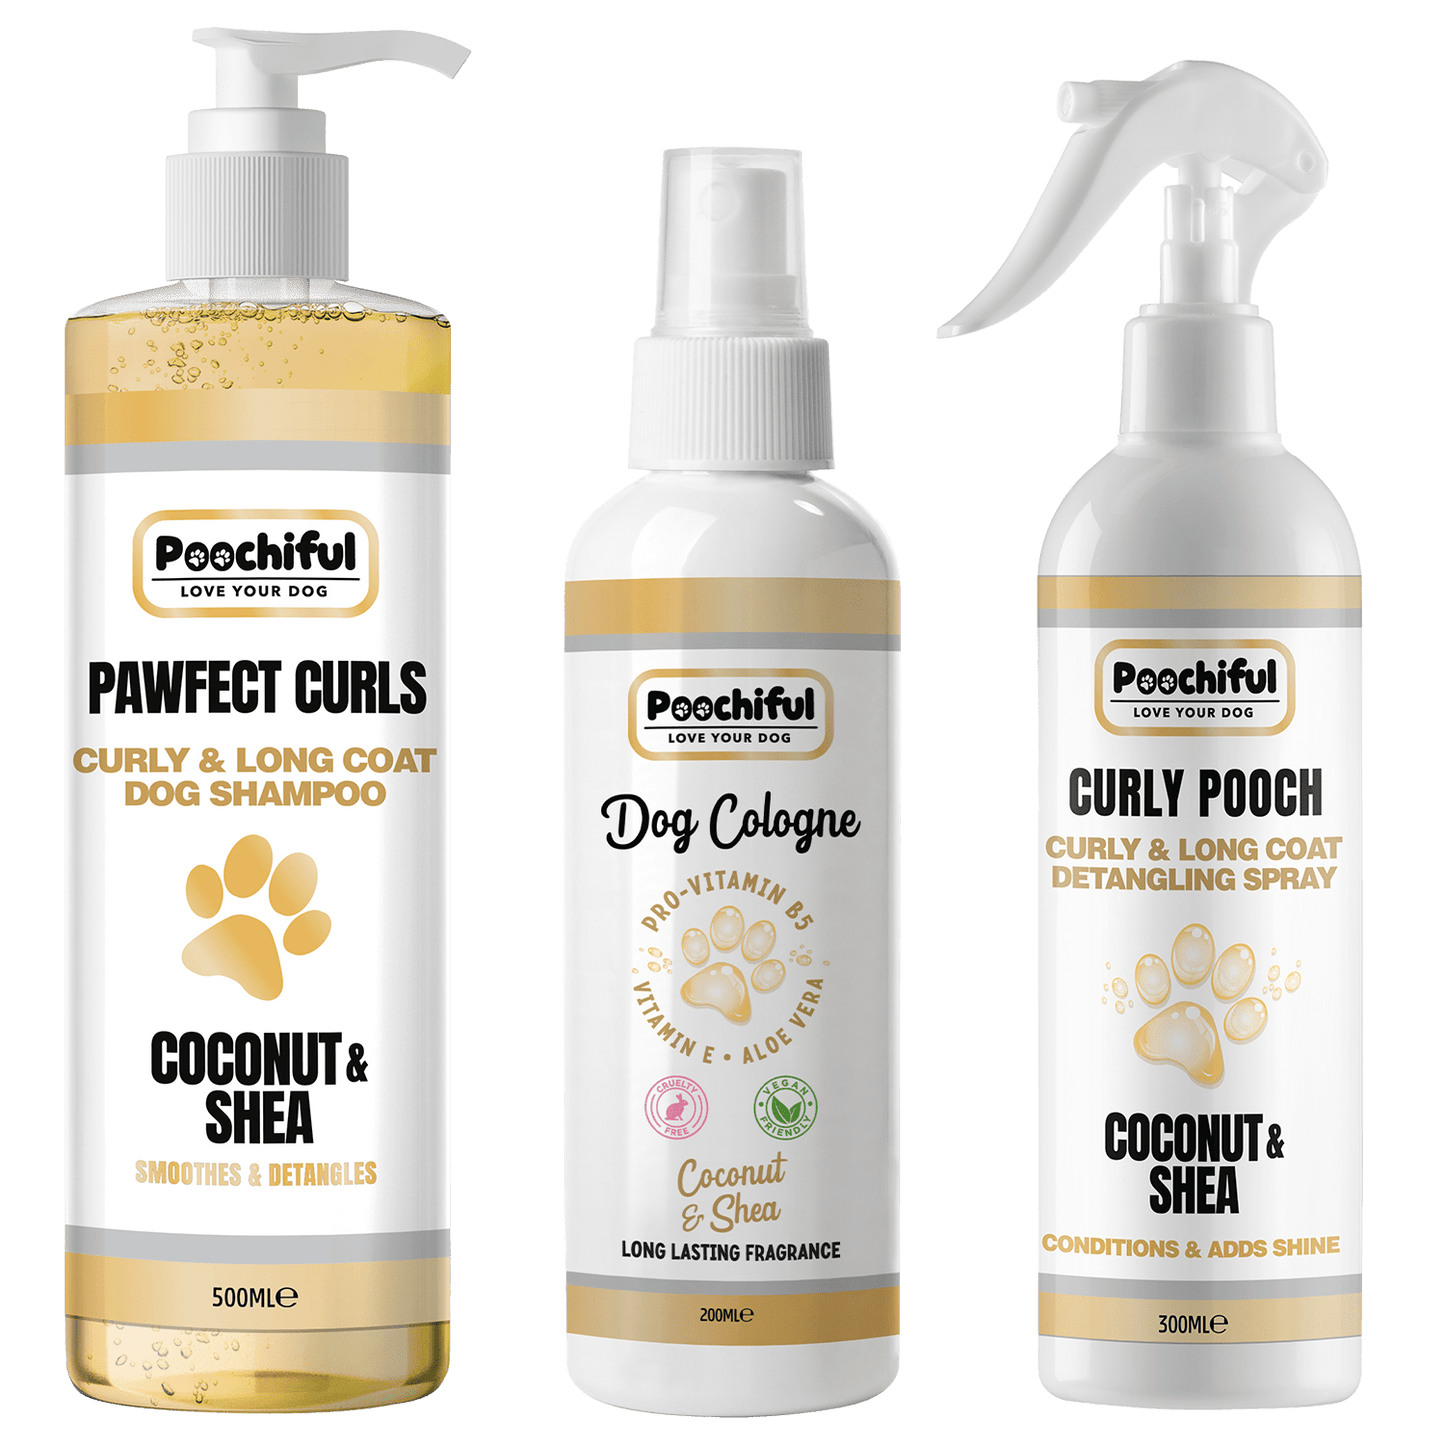 Pawfect Curls 500ml + Coconut And Shea 200ml Cologne + Curly Pooch 300ml Detangling Bundle